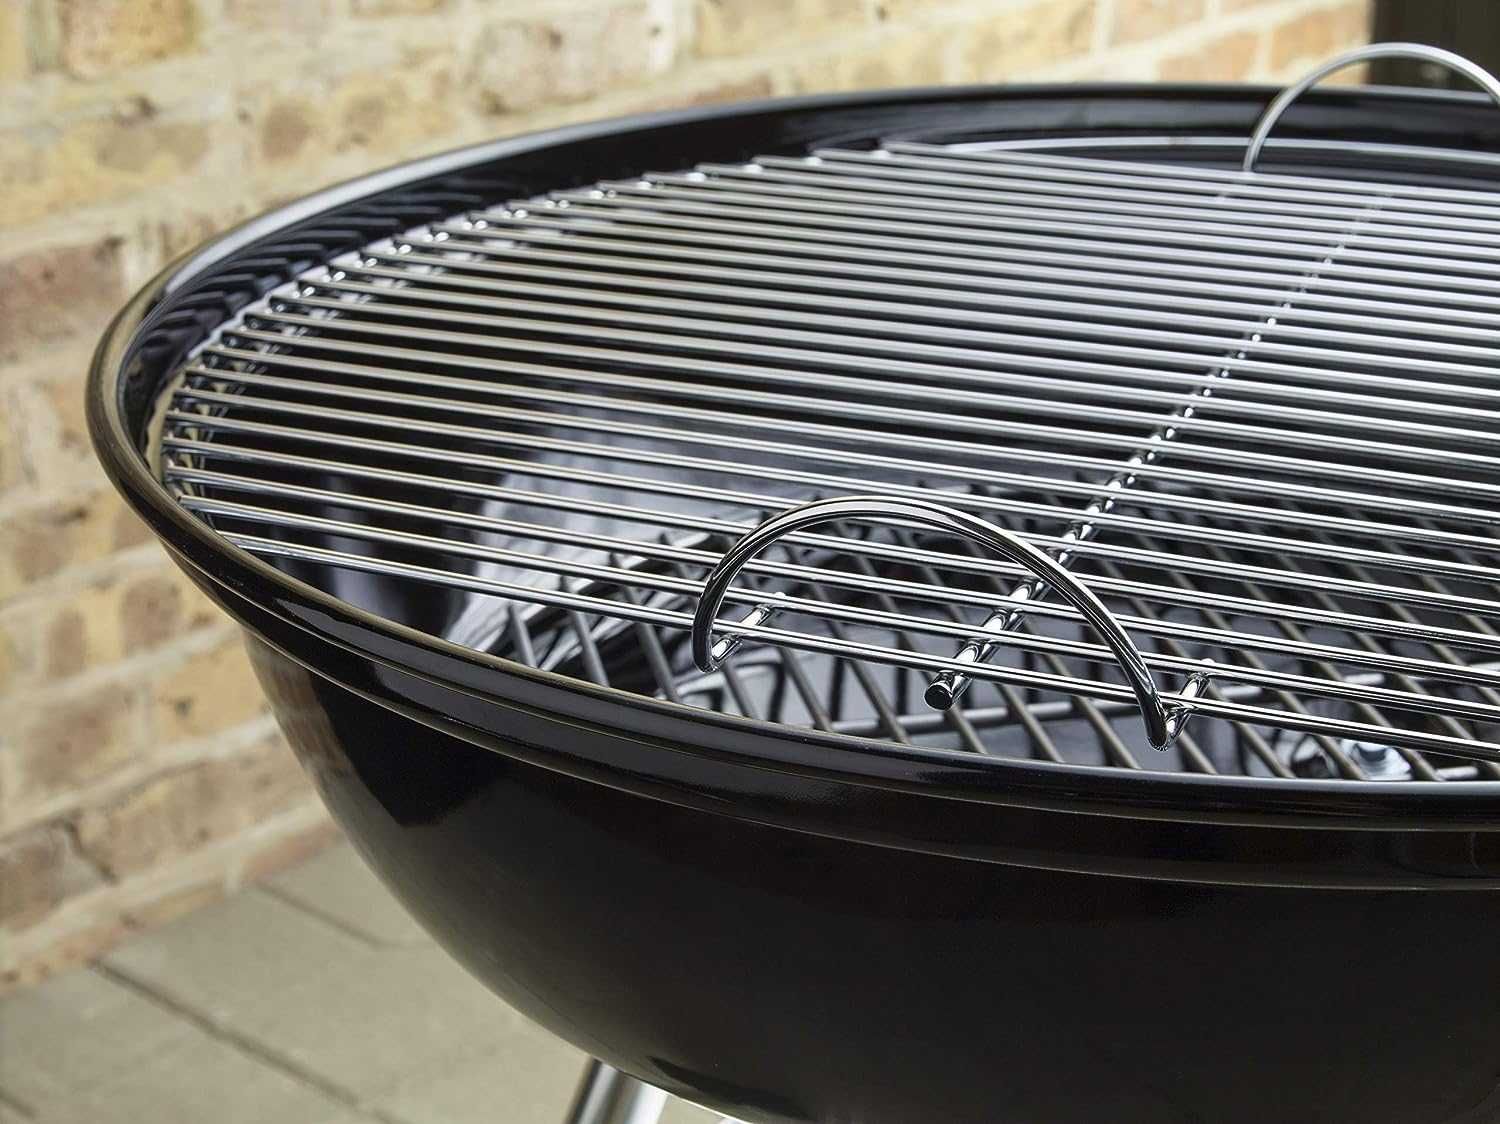 Amerykański Grill Weber Compact Kettle Barbecue a Carbone Ø 57 cm